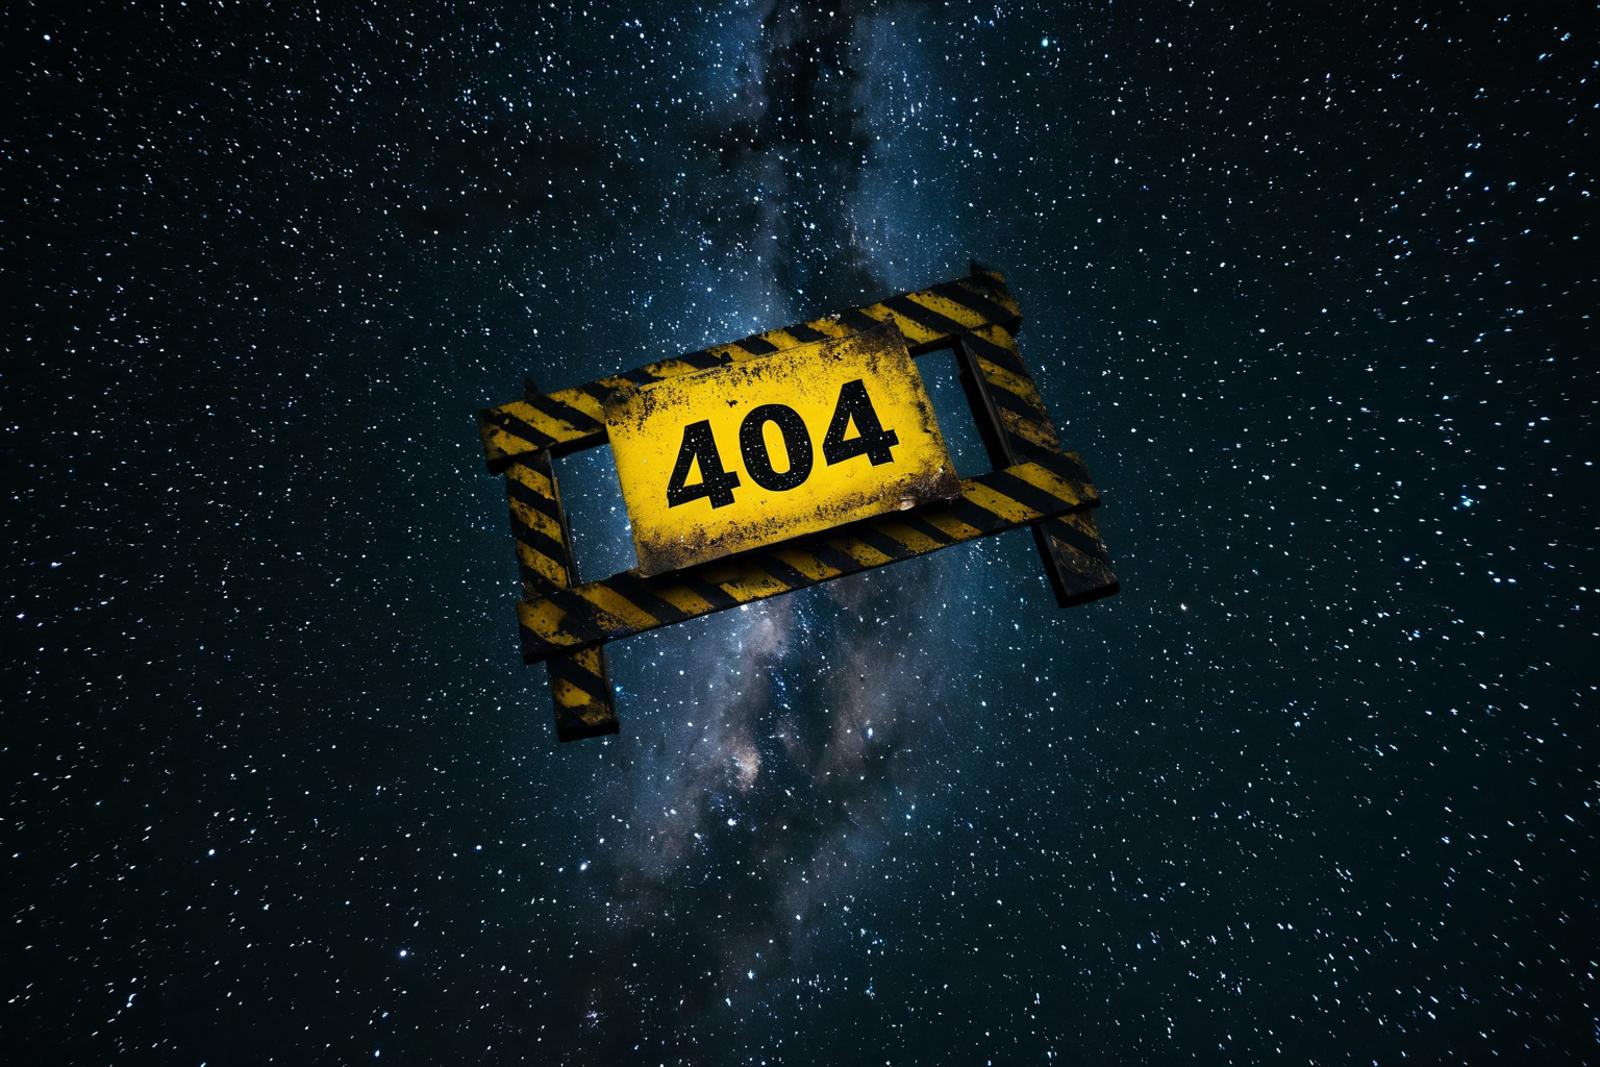 A 404 error sign in a starry background.